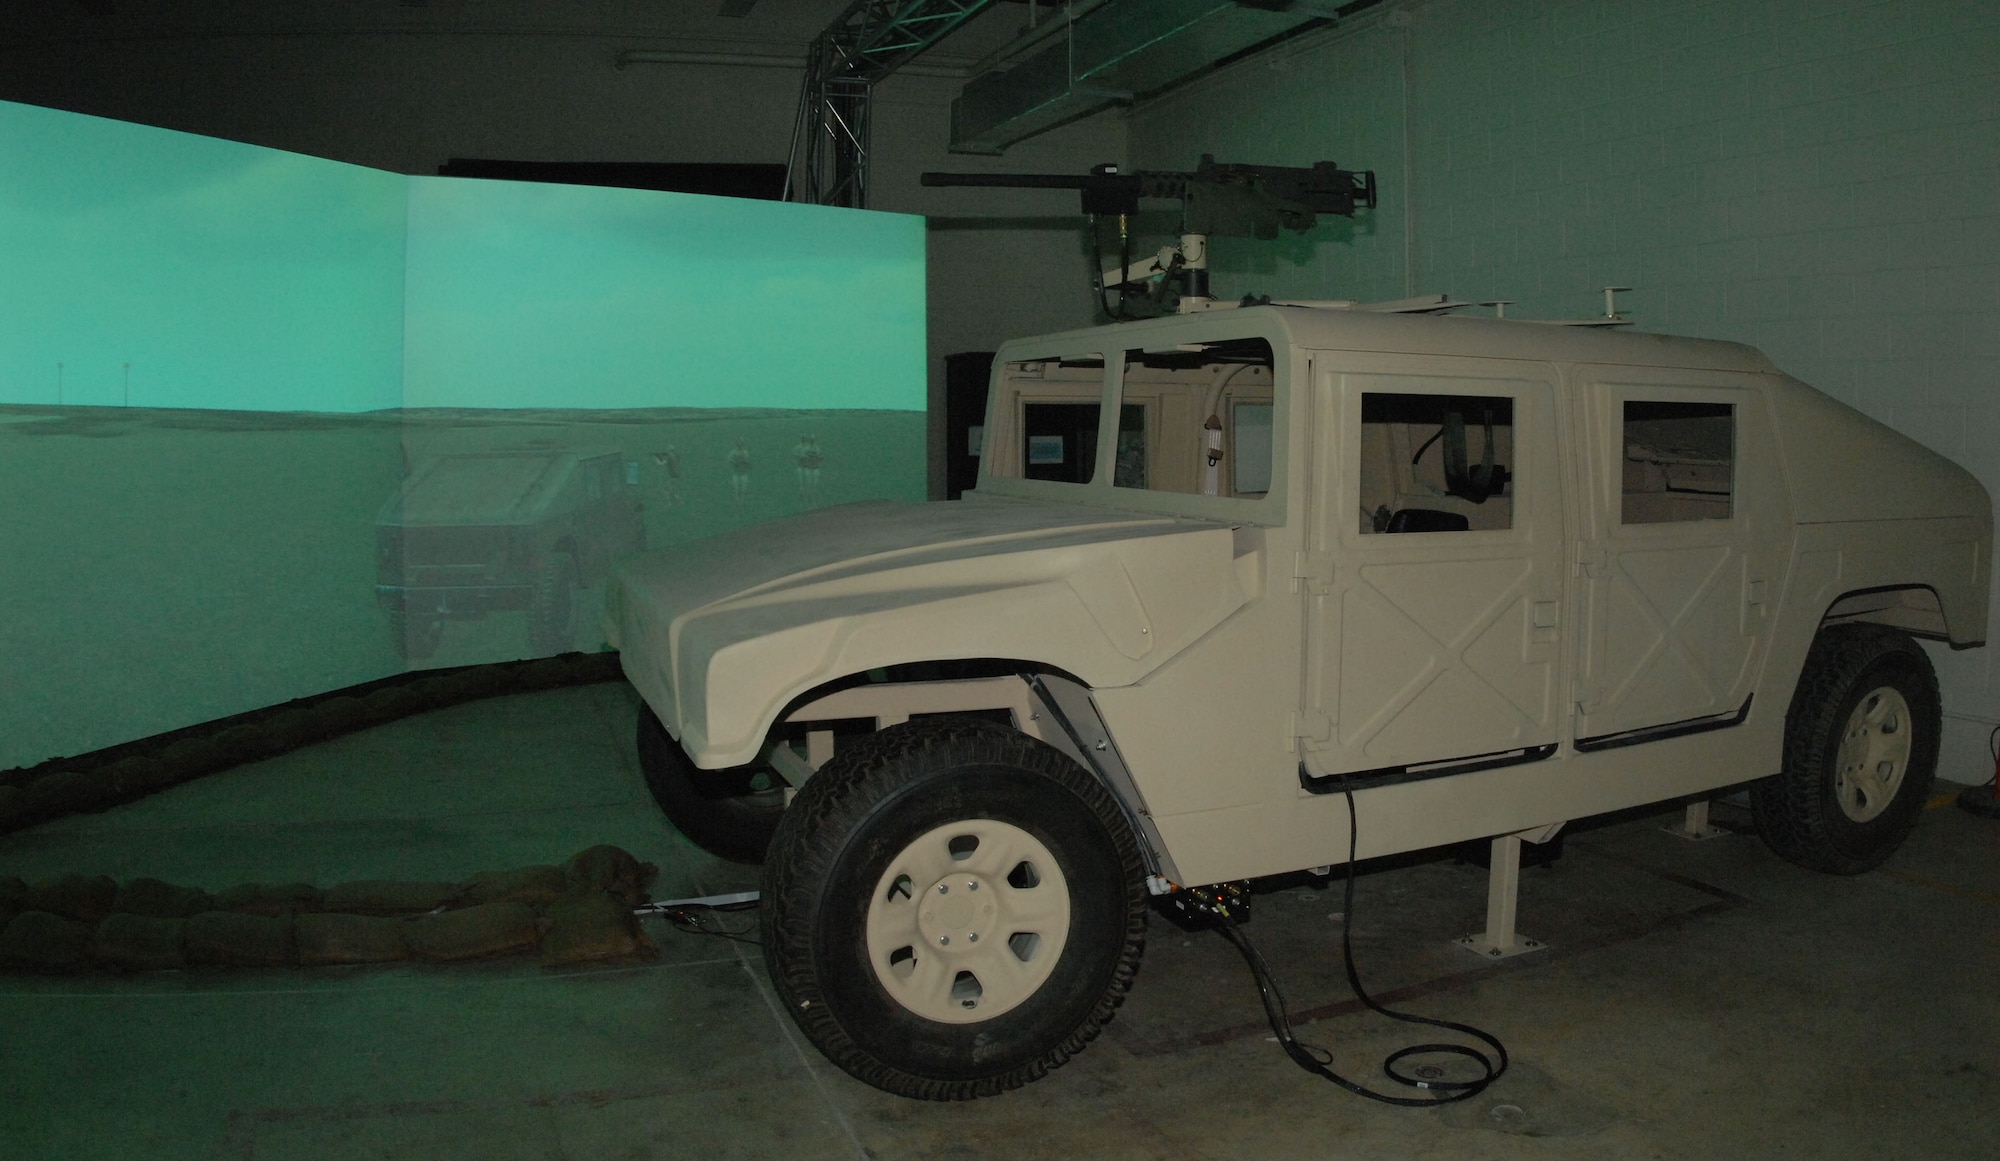 ANDERSEN AIR FORCE BASE, Guam - The Warrior Skills Trainer pictured showcases a 180-degree projection screen and full-size, computerized High Mobility Multipurpose Wheeled Vehicle, also known as HMMWV or more commonly called a humvee. Andersen AFB is the third base in the U.S. Air Force to acquire the WST. (U.S. Air Force photo by Senior Airman Shane Dunaway)